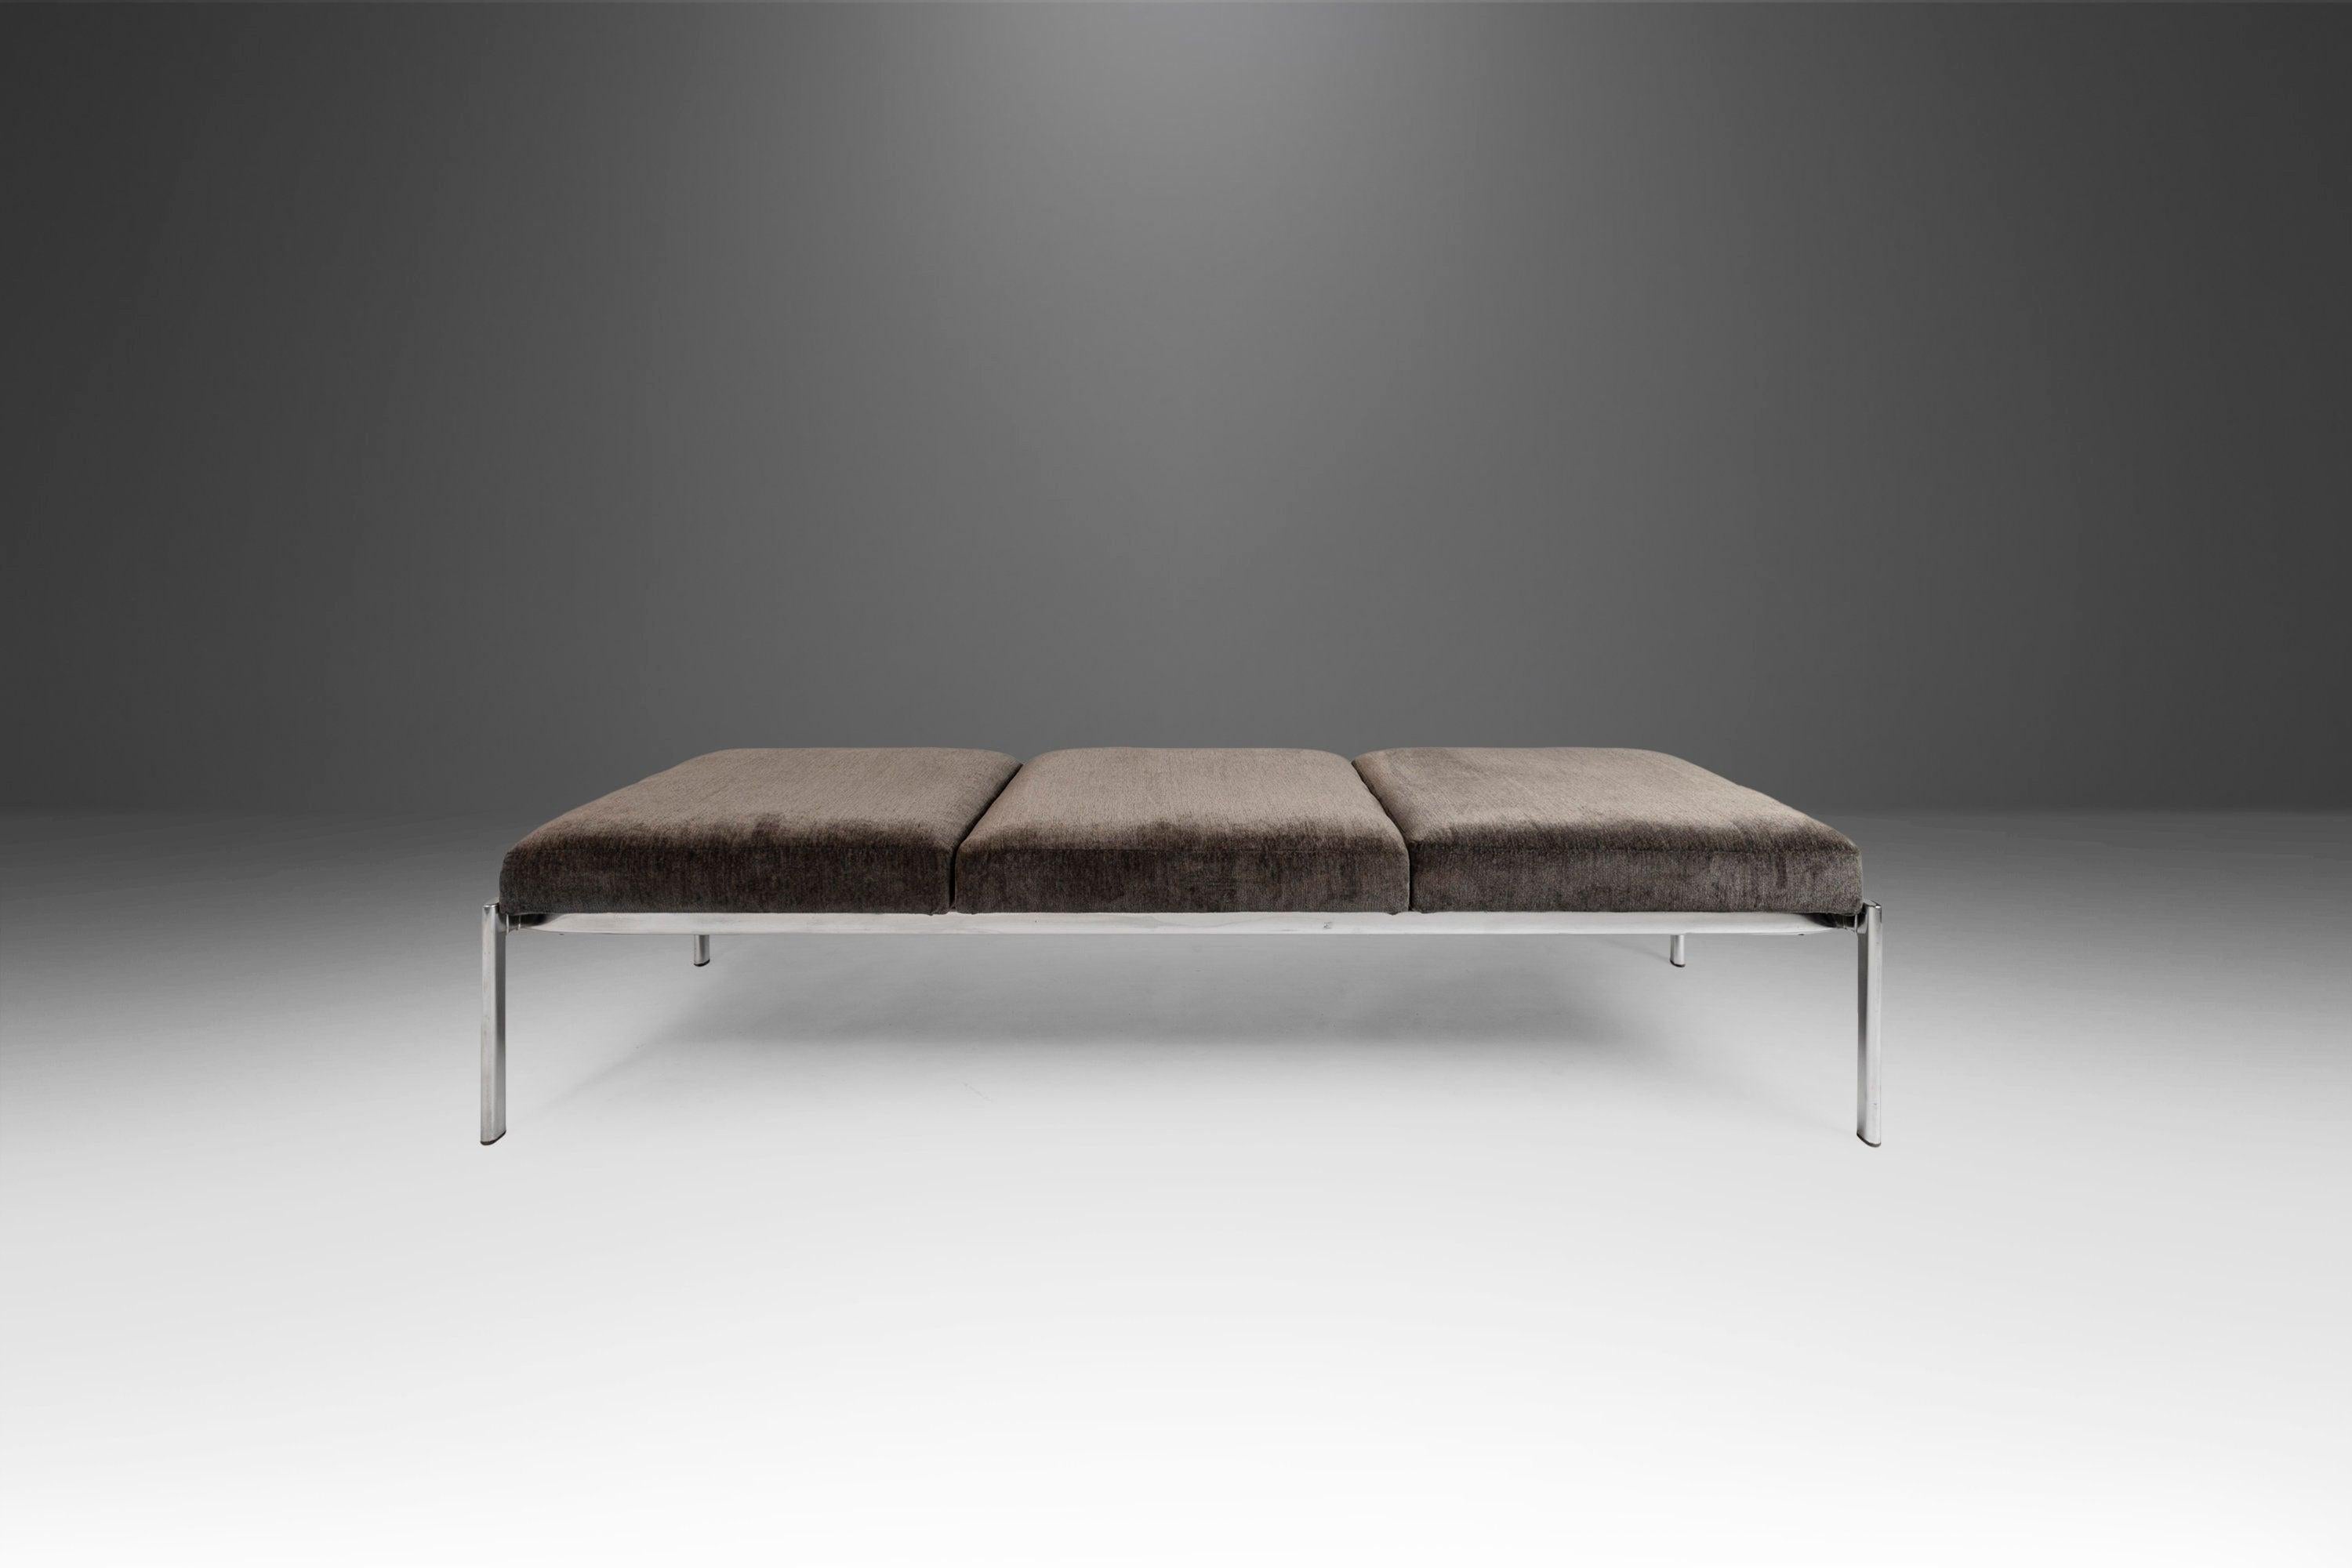 Equal parts style and comfort this luxurious three-seater bench designed by Ilmari Tapiovaara for Stendig is the epitome of Contemporary design. The solid chrome frame, in wonderful vintage condition, is eye-catching from all angles. The original